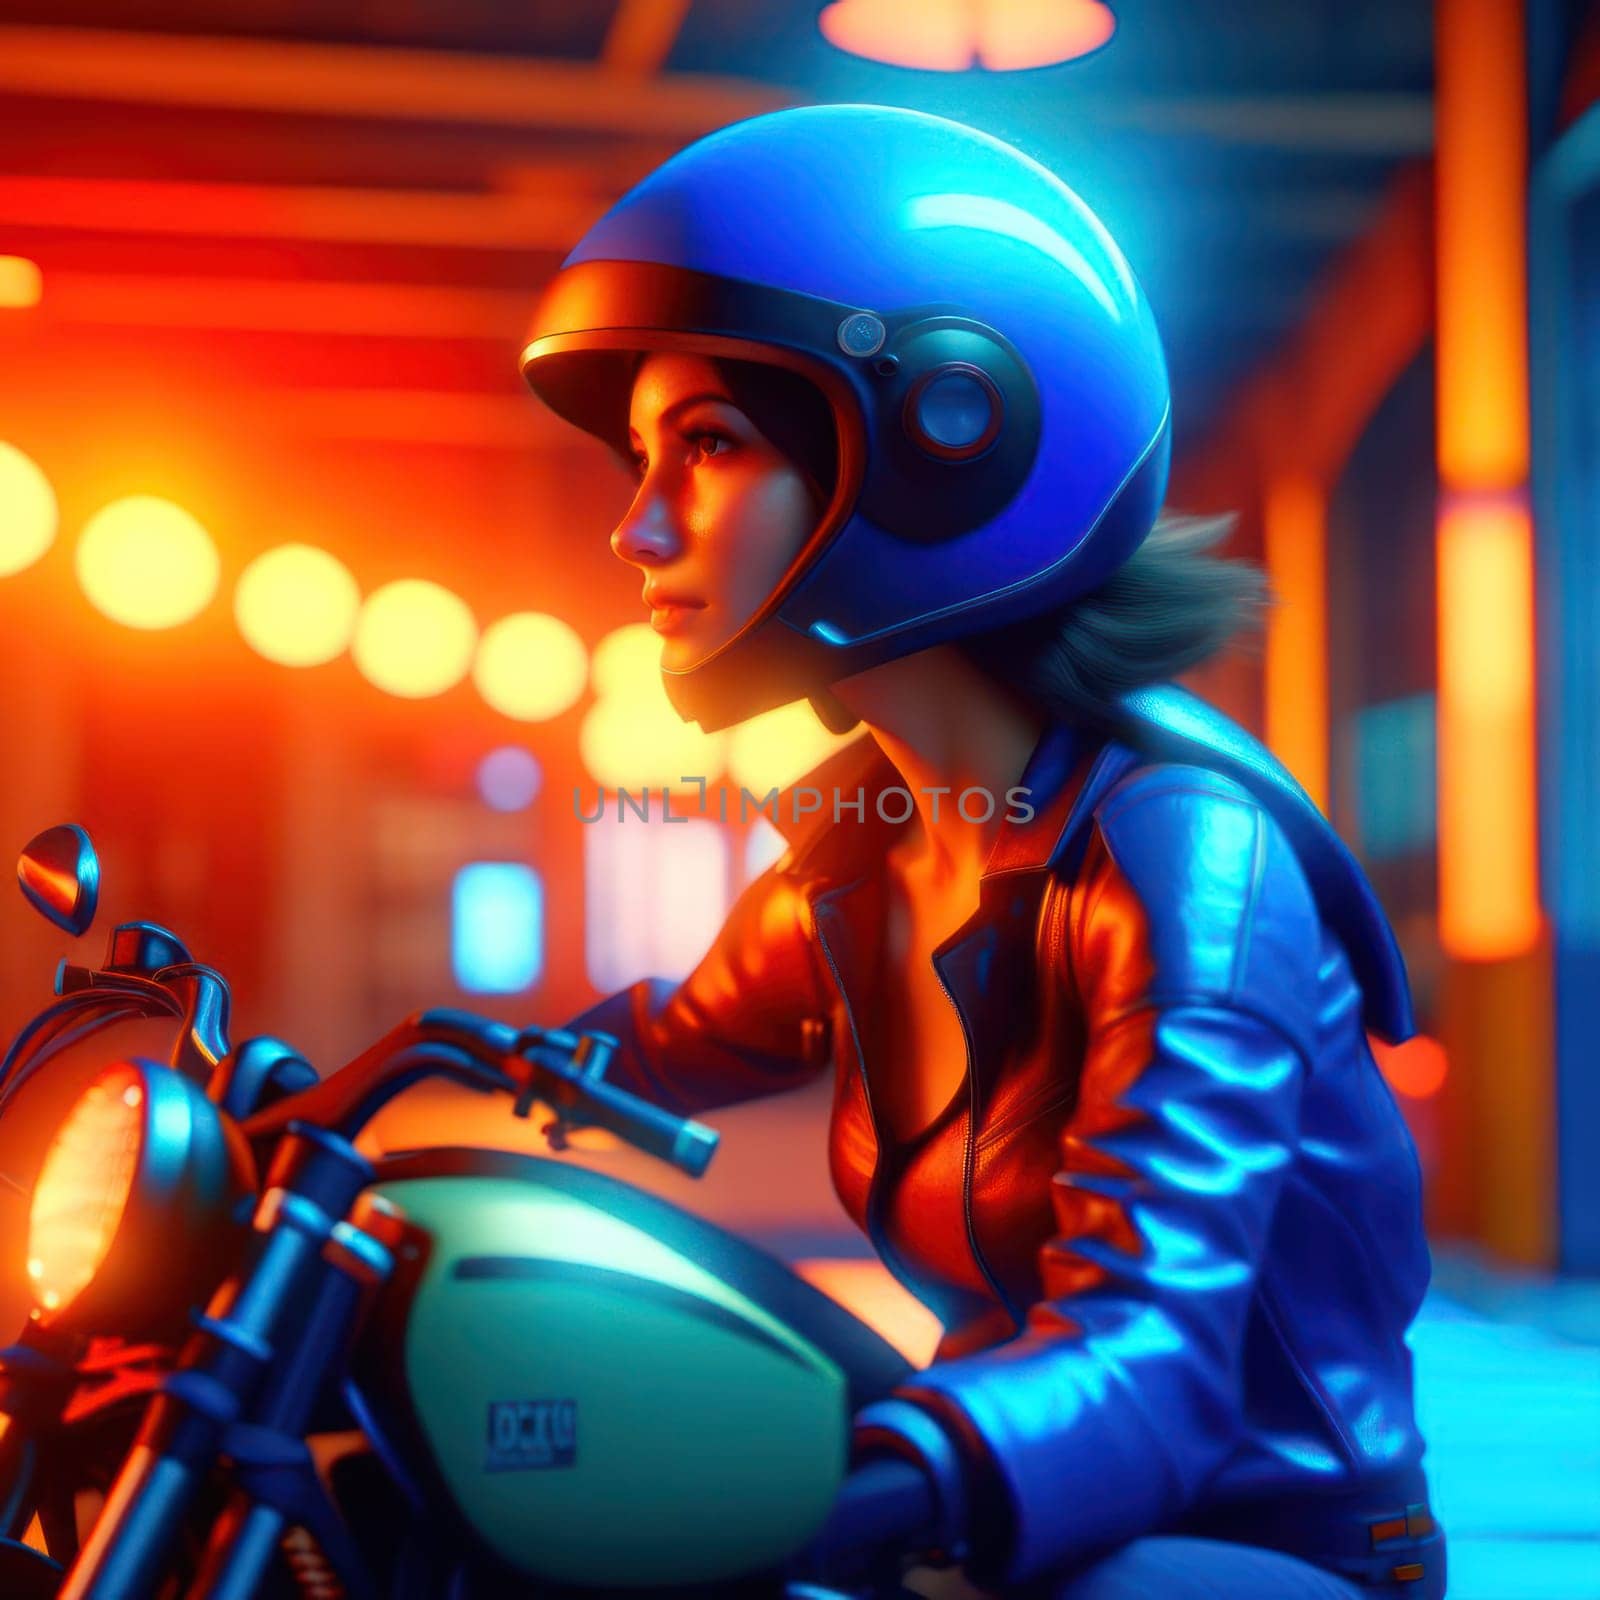 Girl on a motorcycle by nolimit046